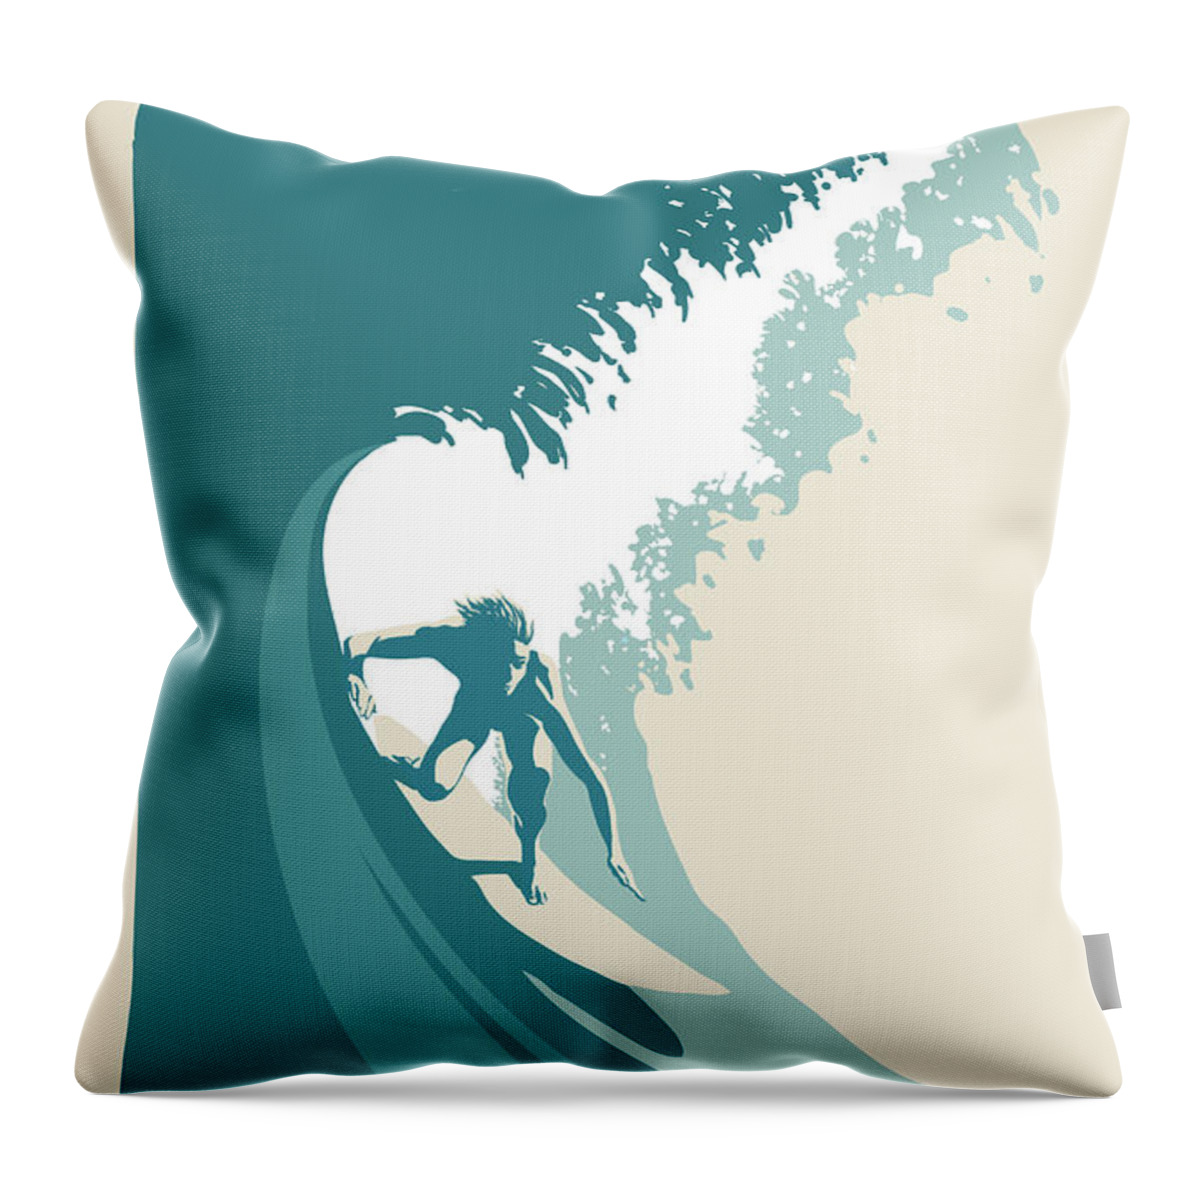 Surfs Up Throw Pillow featuring the painting Surfs Up by Sassan Filsoof